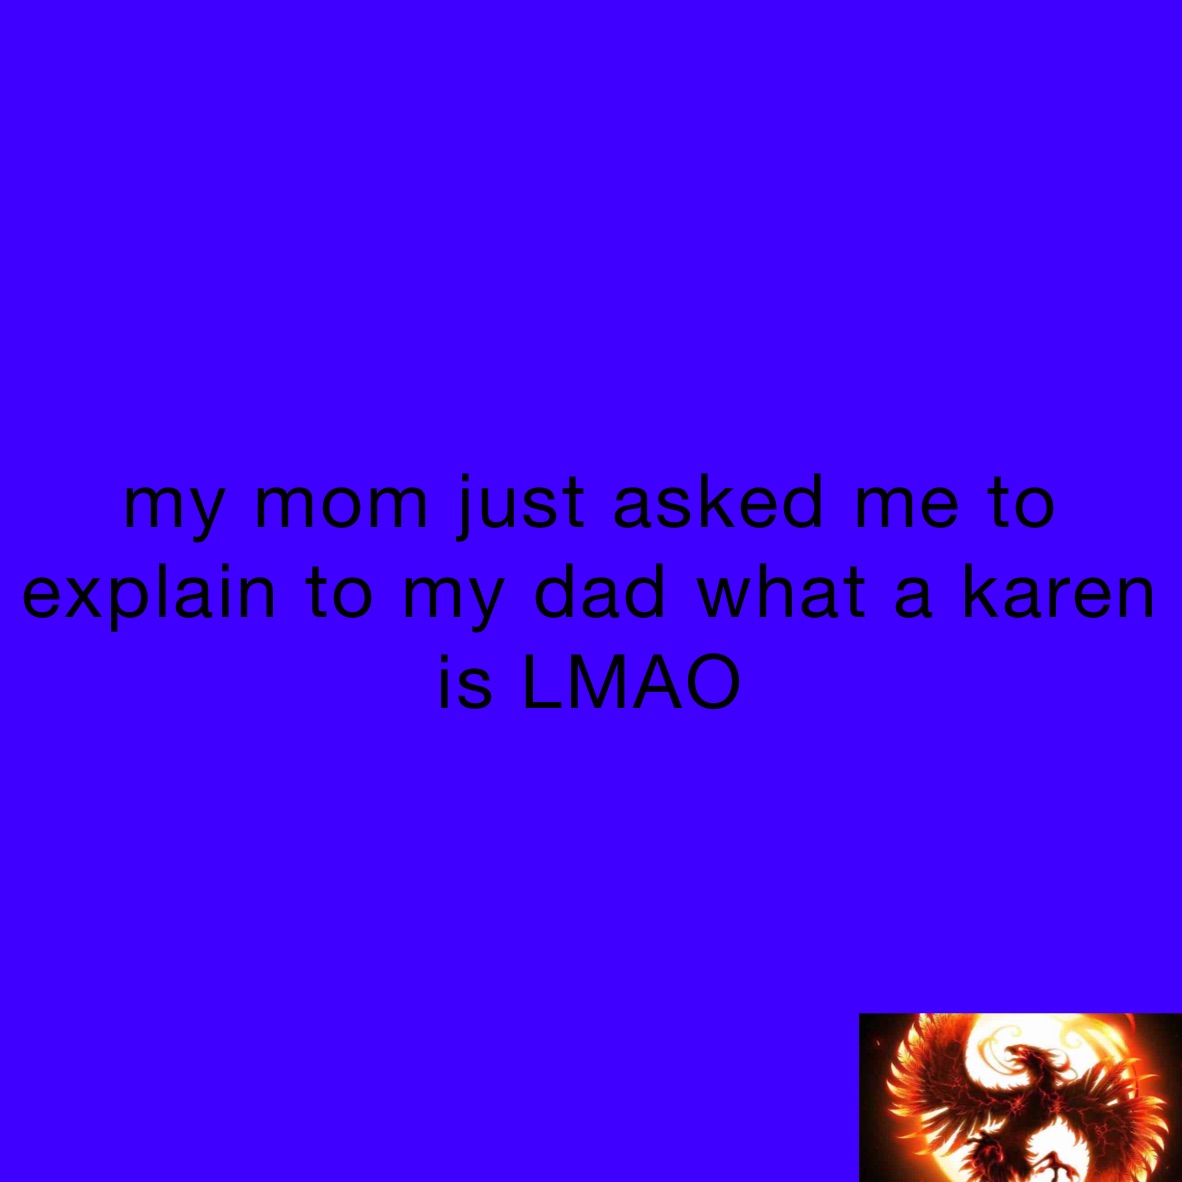 my mom just asked me to explain to my dad what a karen is LMAO